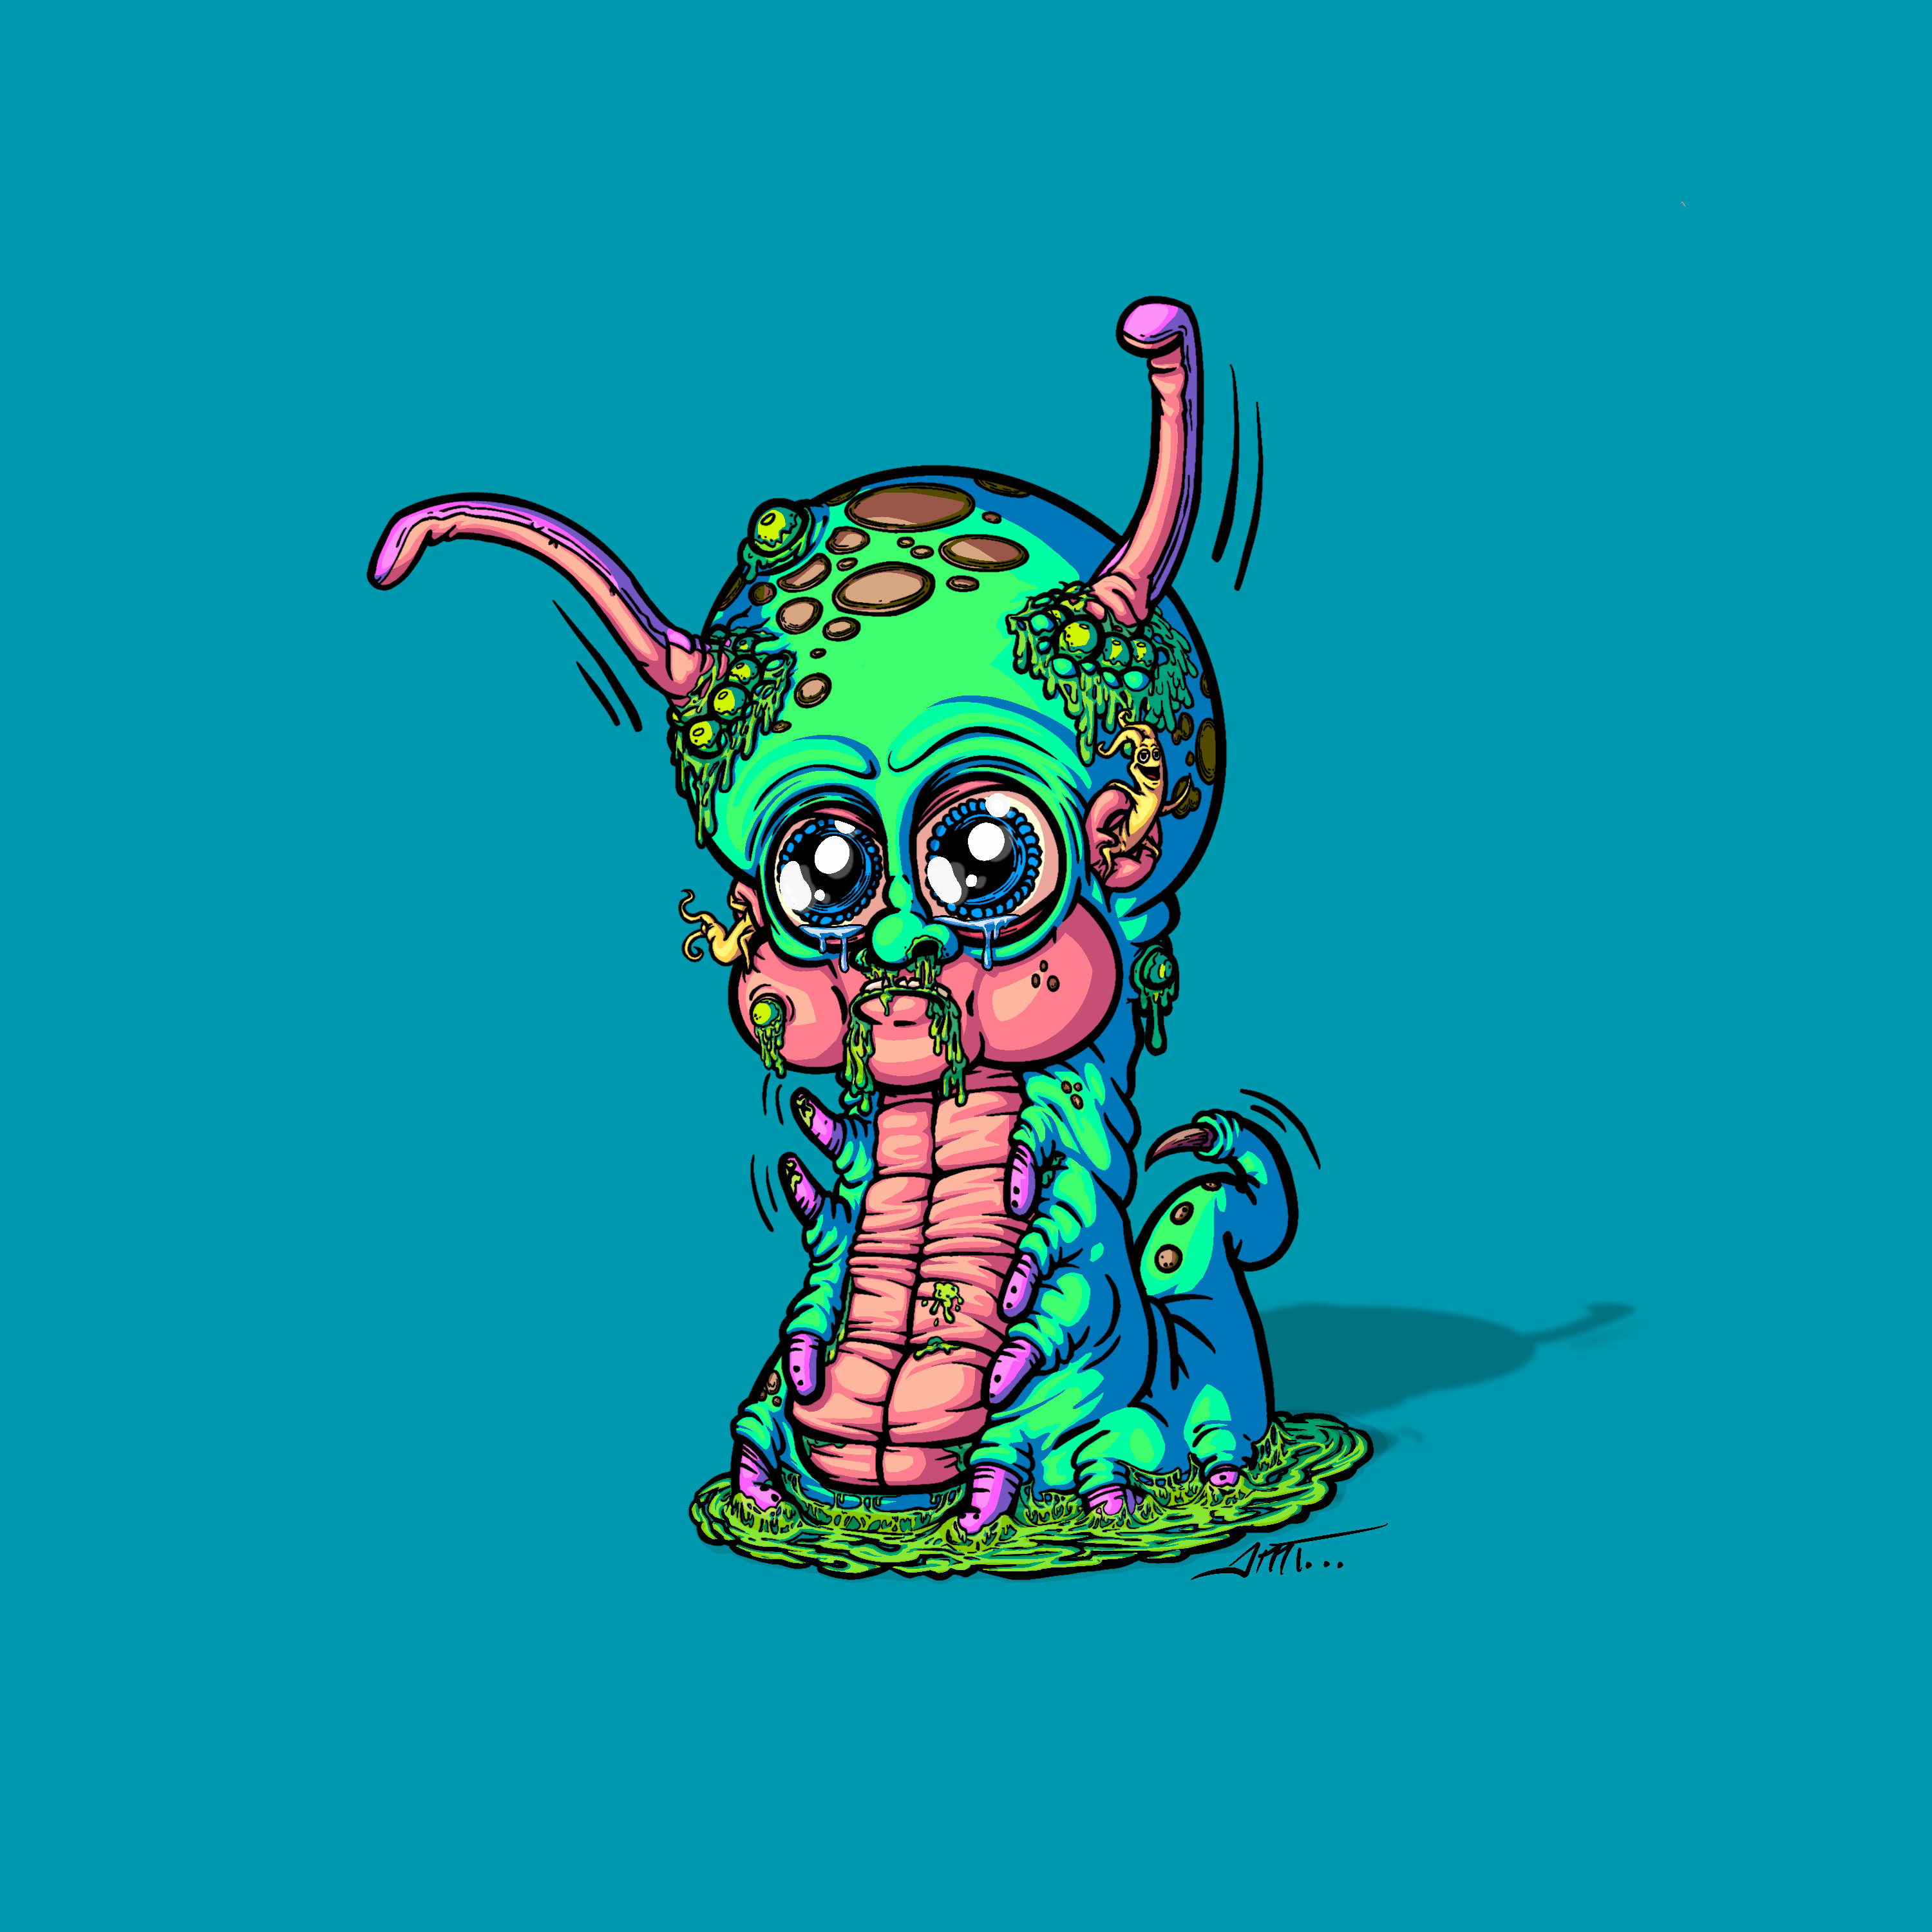 Caterbebe'n'Squirm: Lil gross caterbebe and his wormy parasite friend.